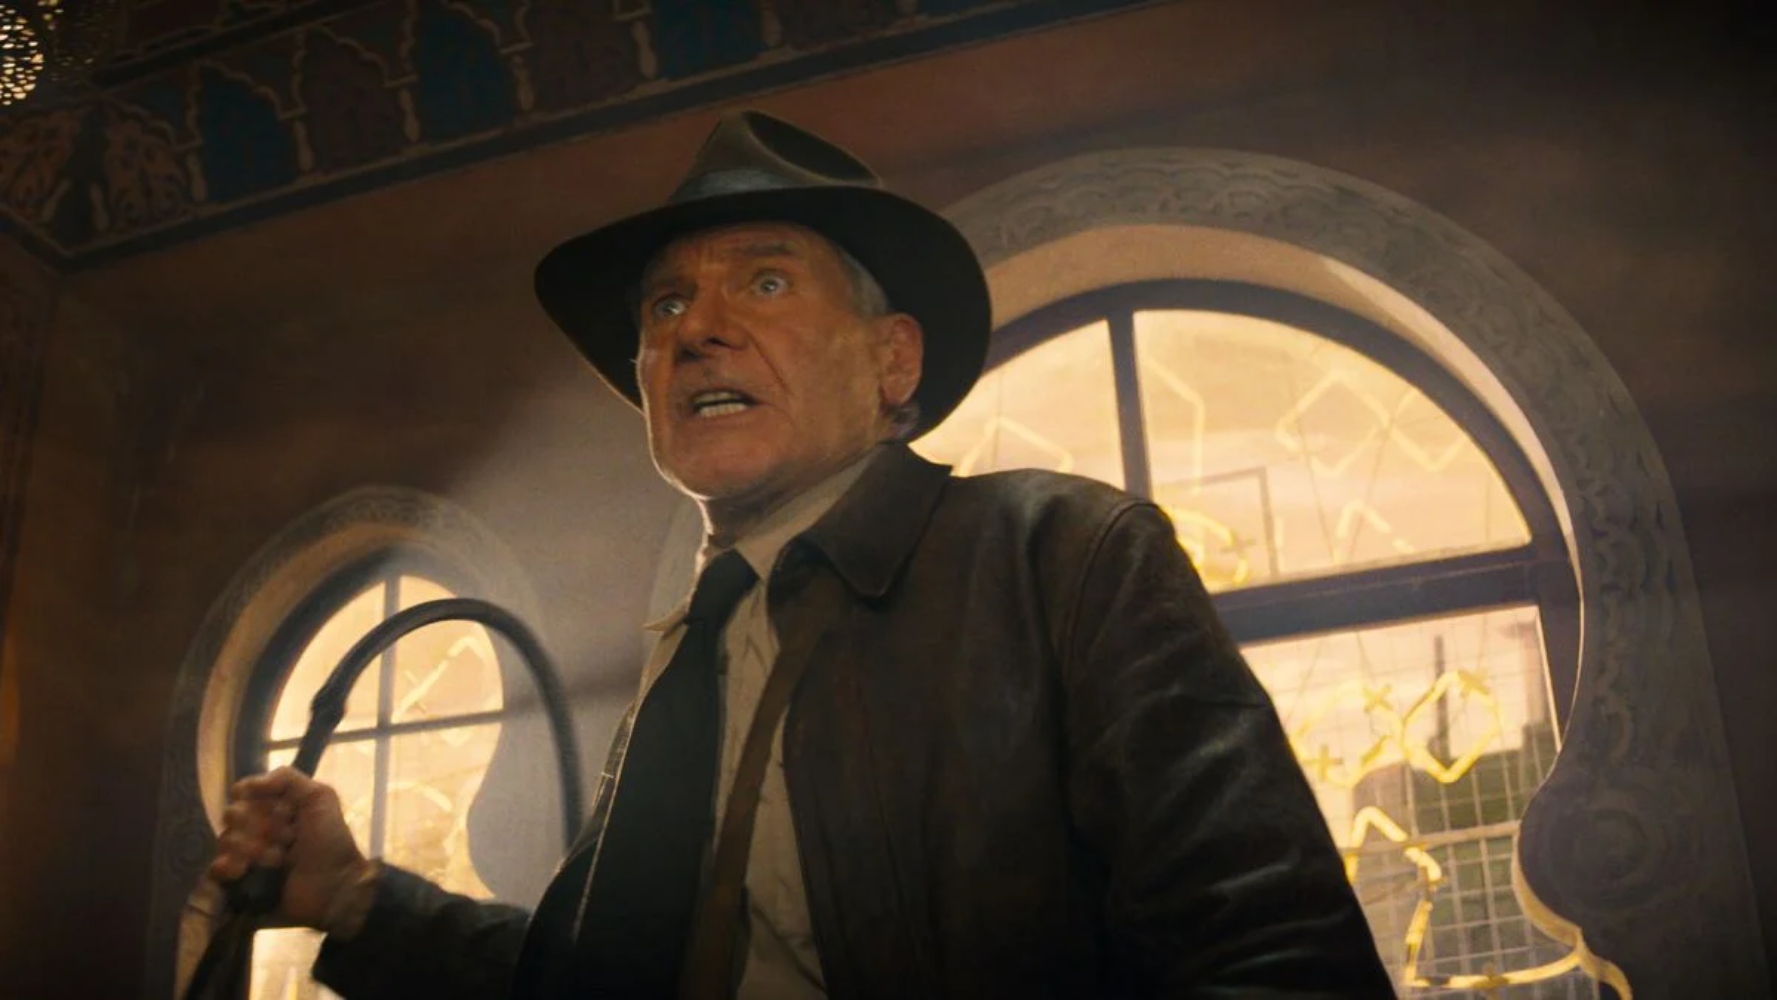 Cannes Review: Indiana Jones and the Dial of Destiny Marks a Decent Send-Off for Harrison Ford